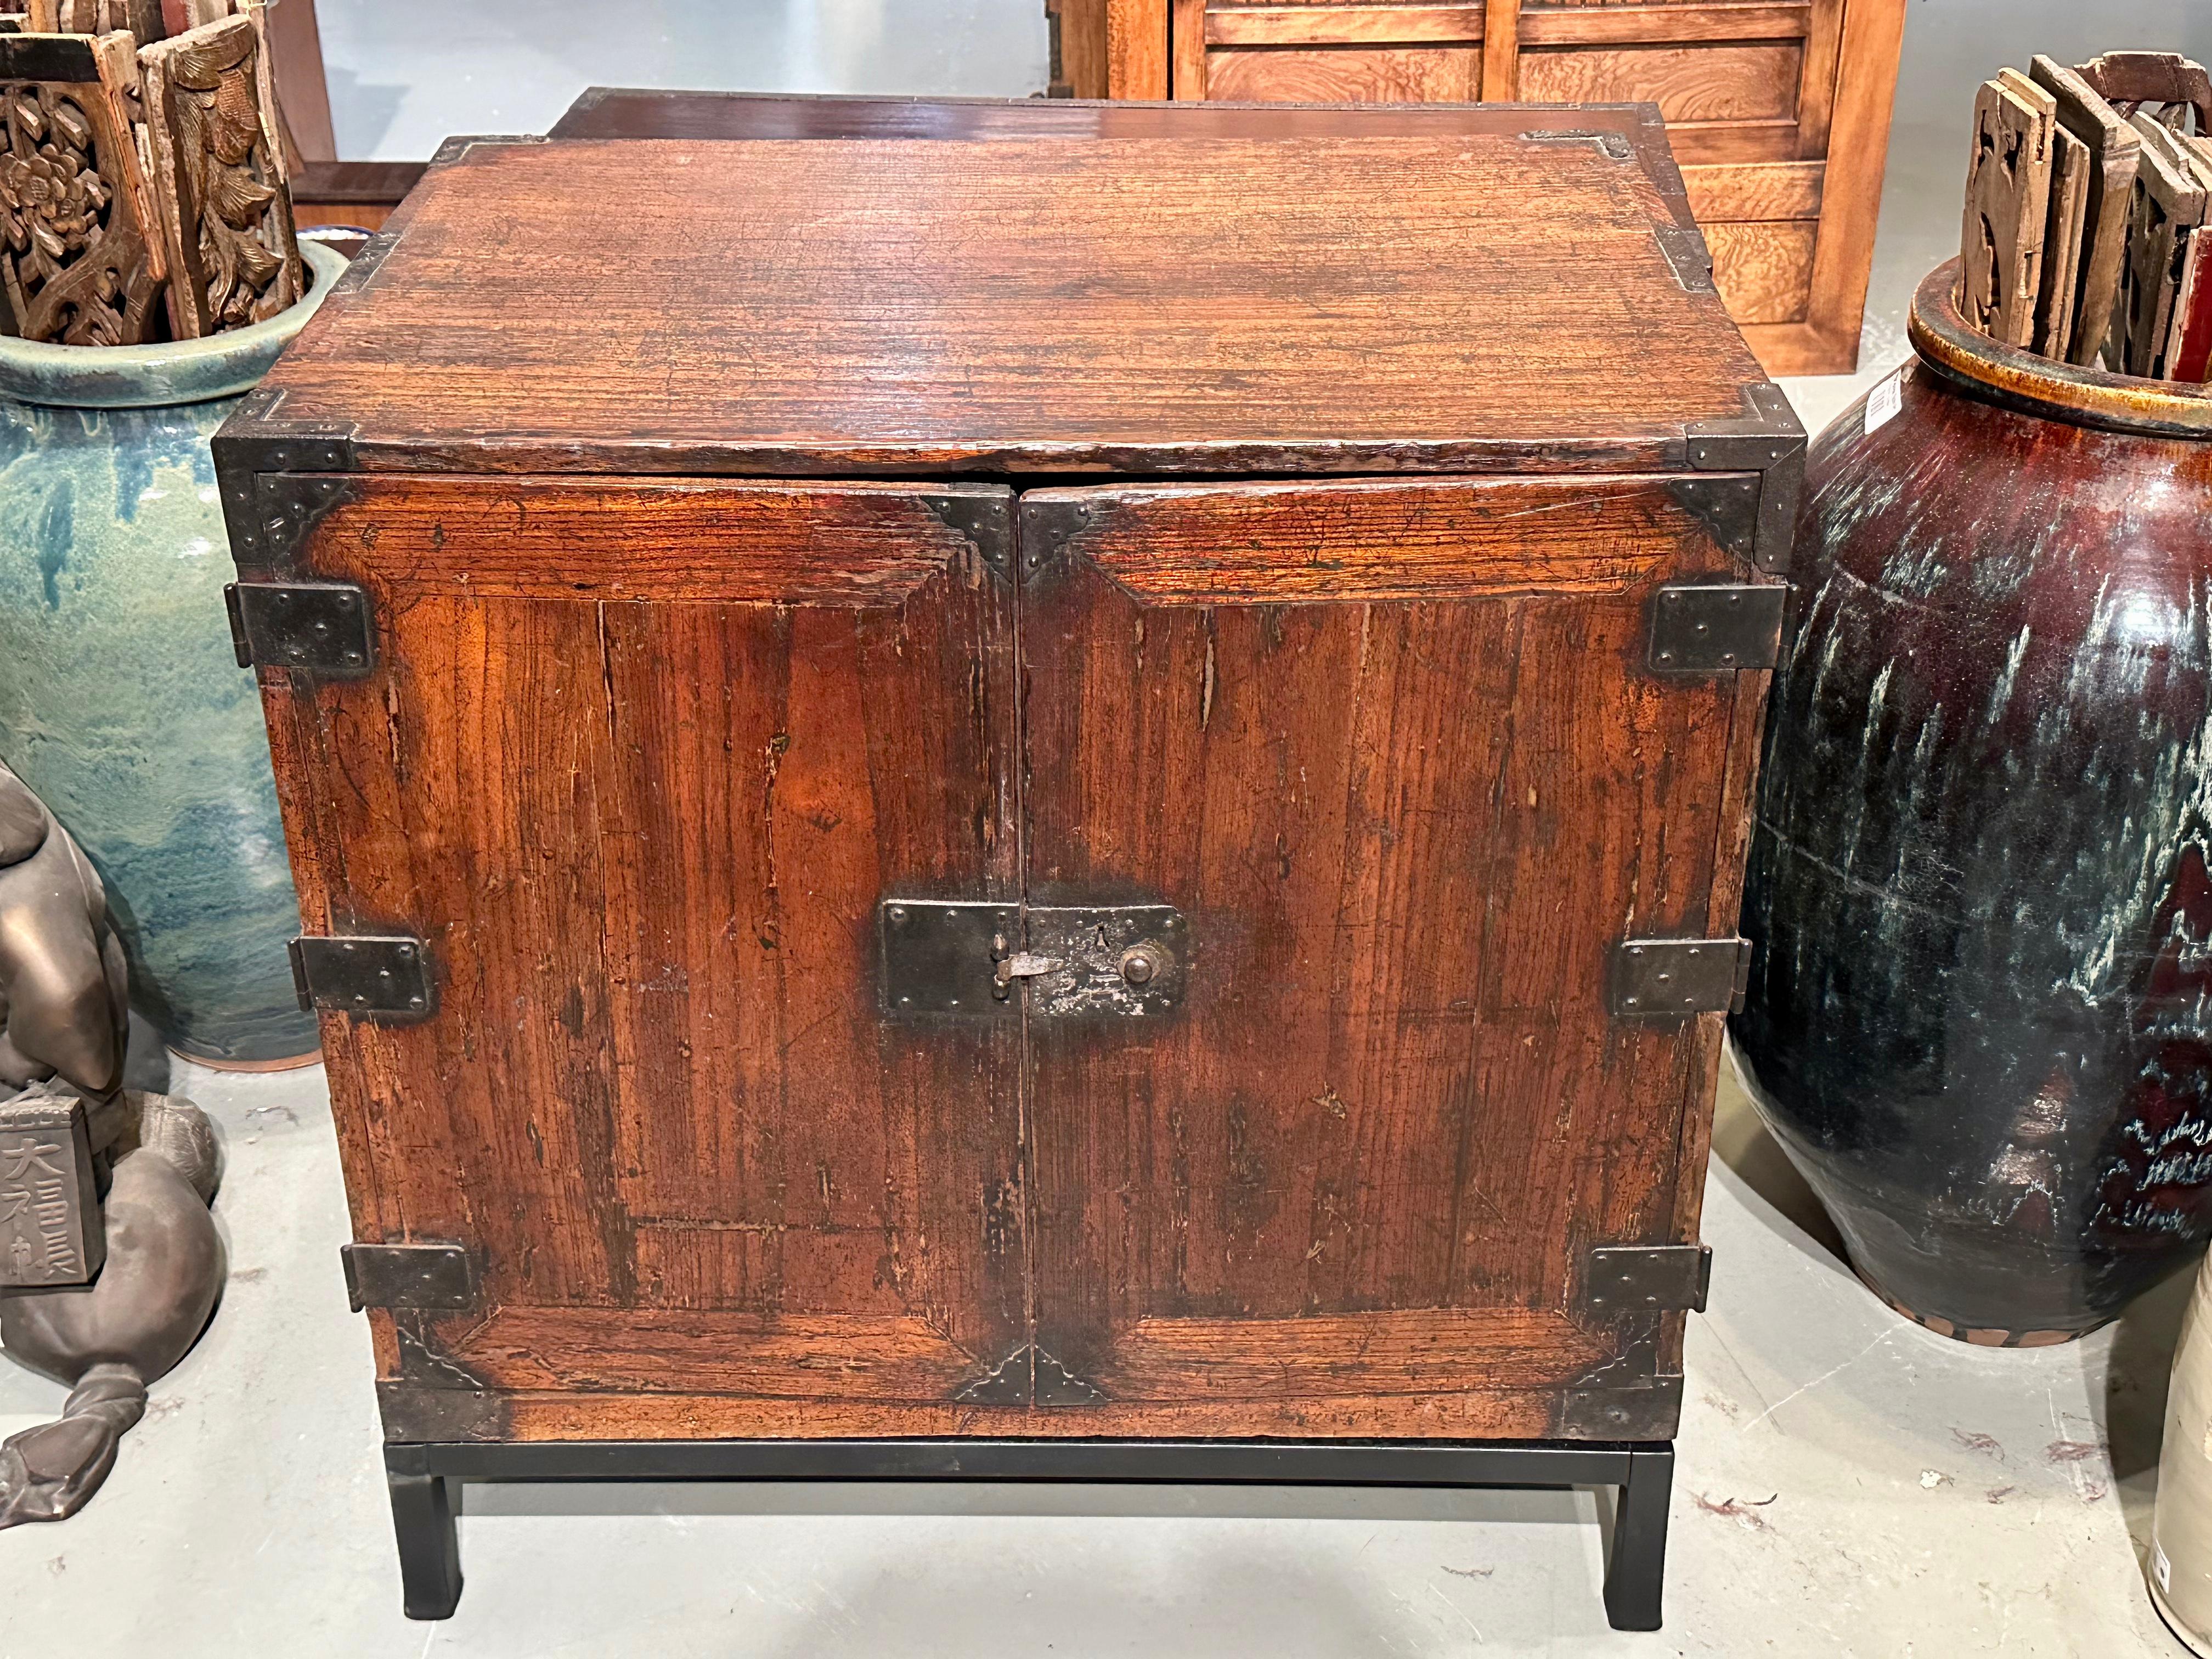 Available from Shogun's Gallery in Portland, Oregon for over 40 years specializing in Asian Arts & Antiques.

This is a very rare 350 year old antique Japanese tansu from the 17th century. This is a type of Kakesuzuri and contains a Tegata box